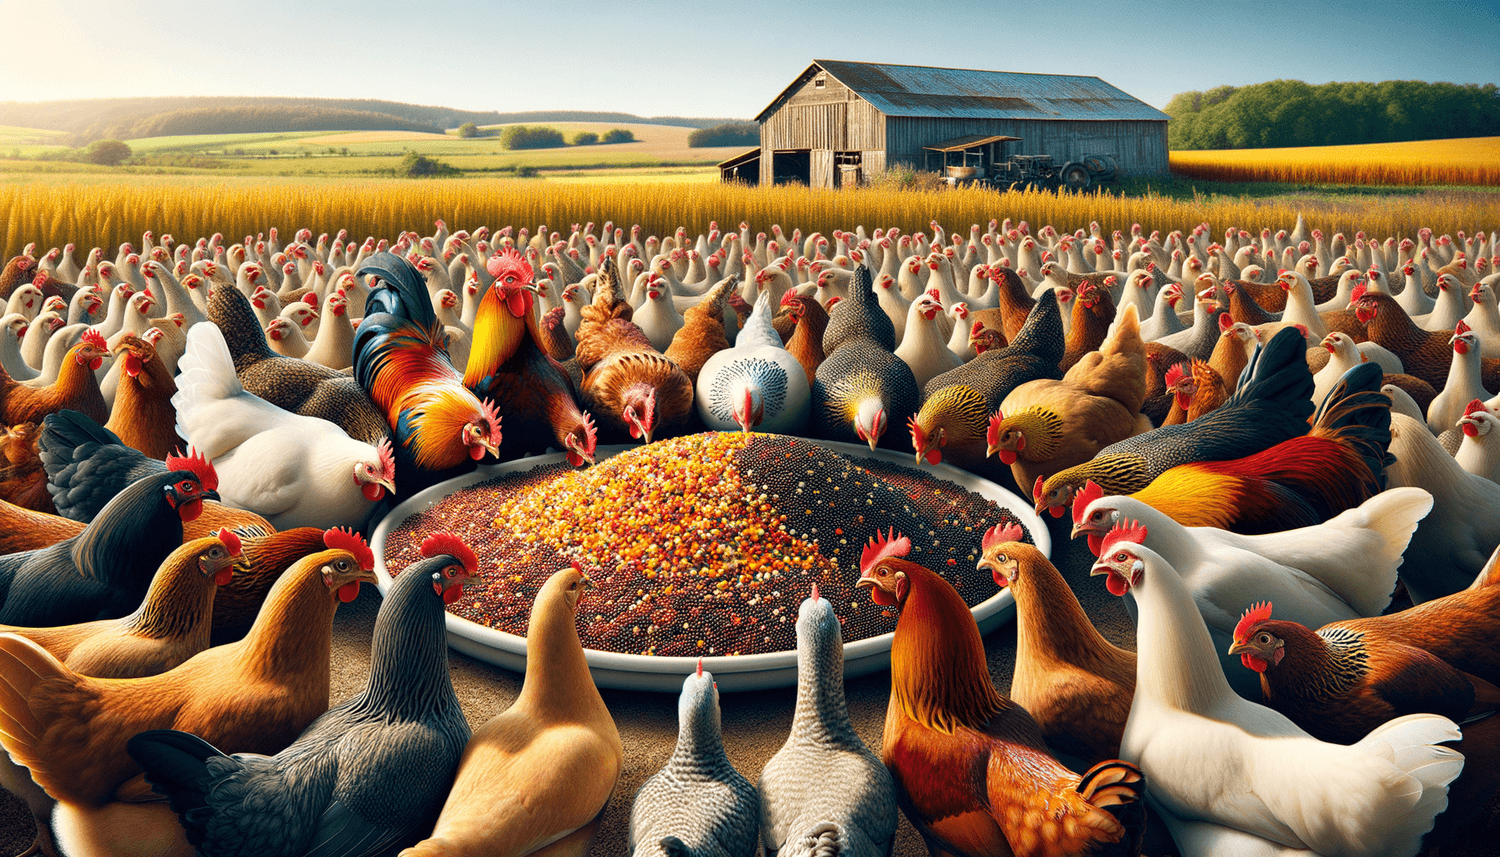 Can Chickens Eat Quinoa?